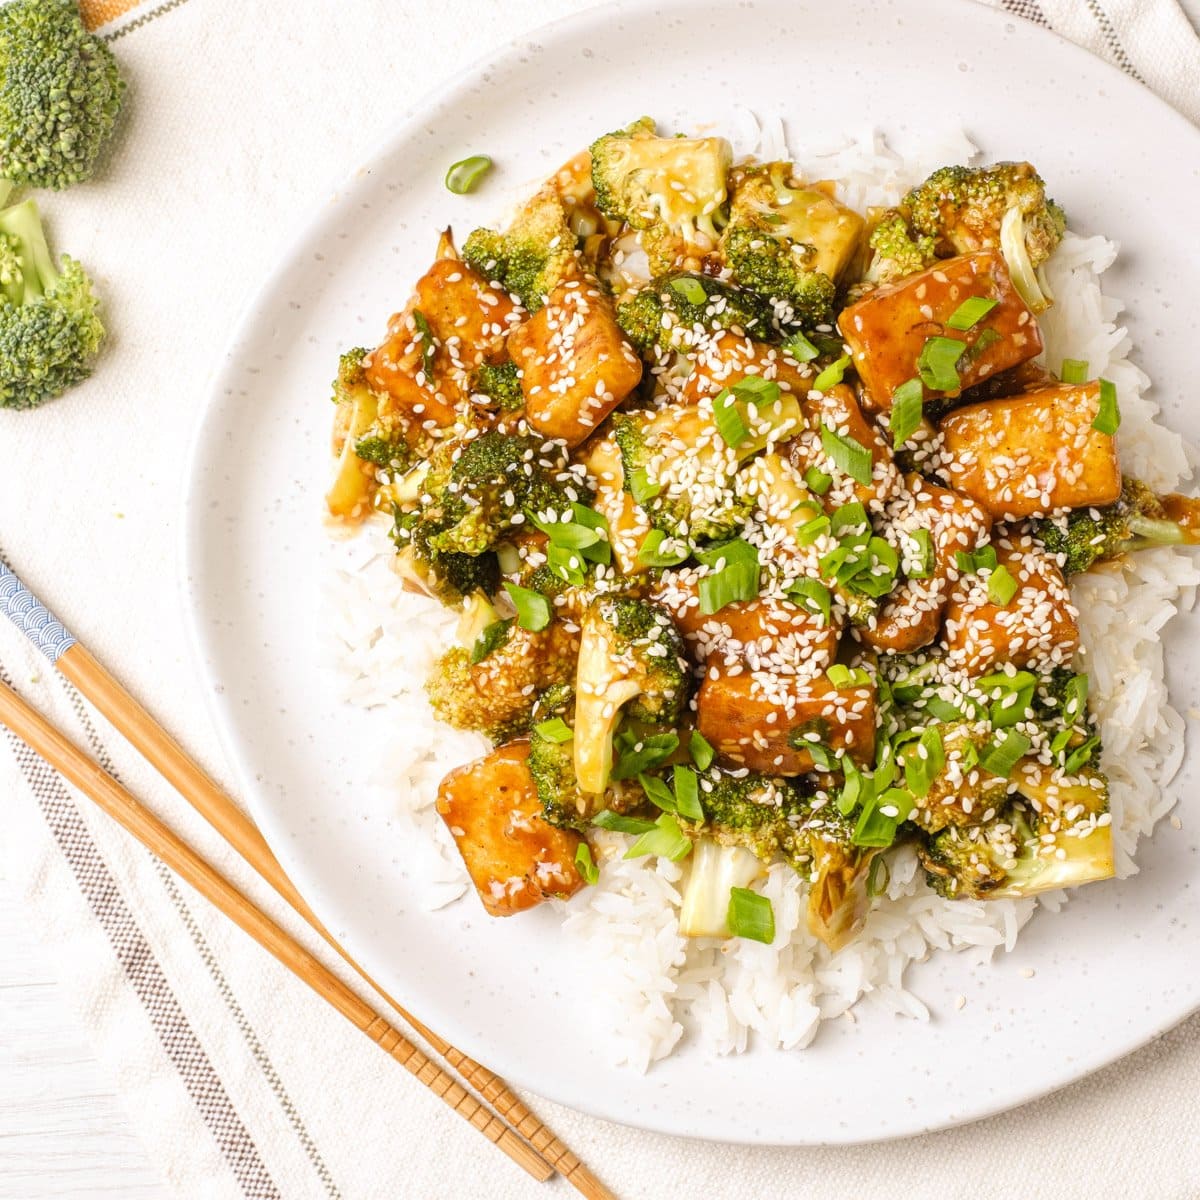 Tofu Broccoli Stir Fry in garlic sauce in a plate garnished with scallions